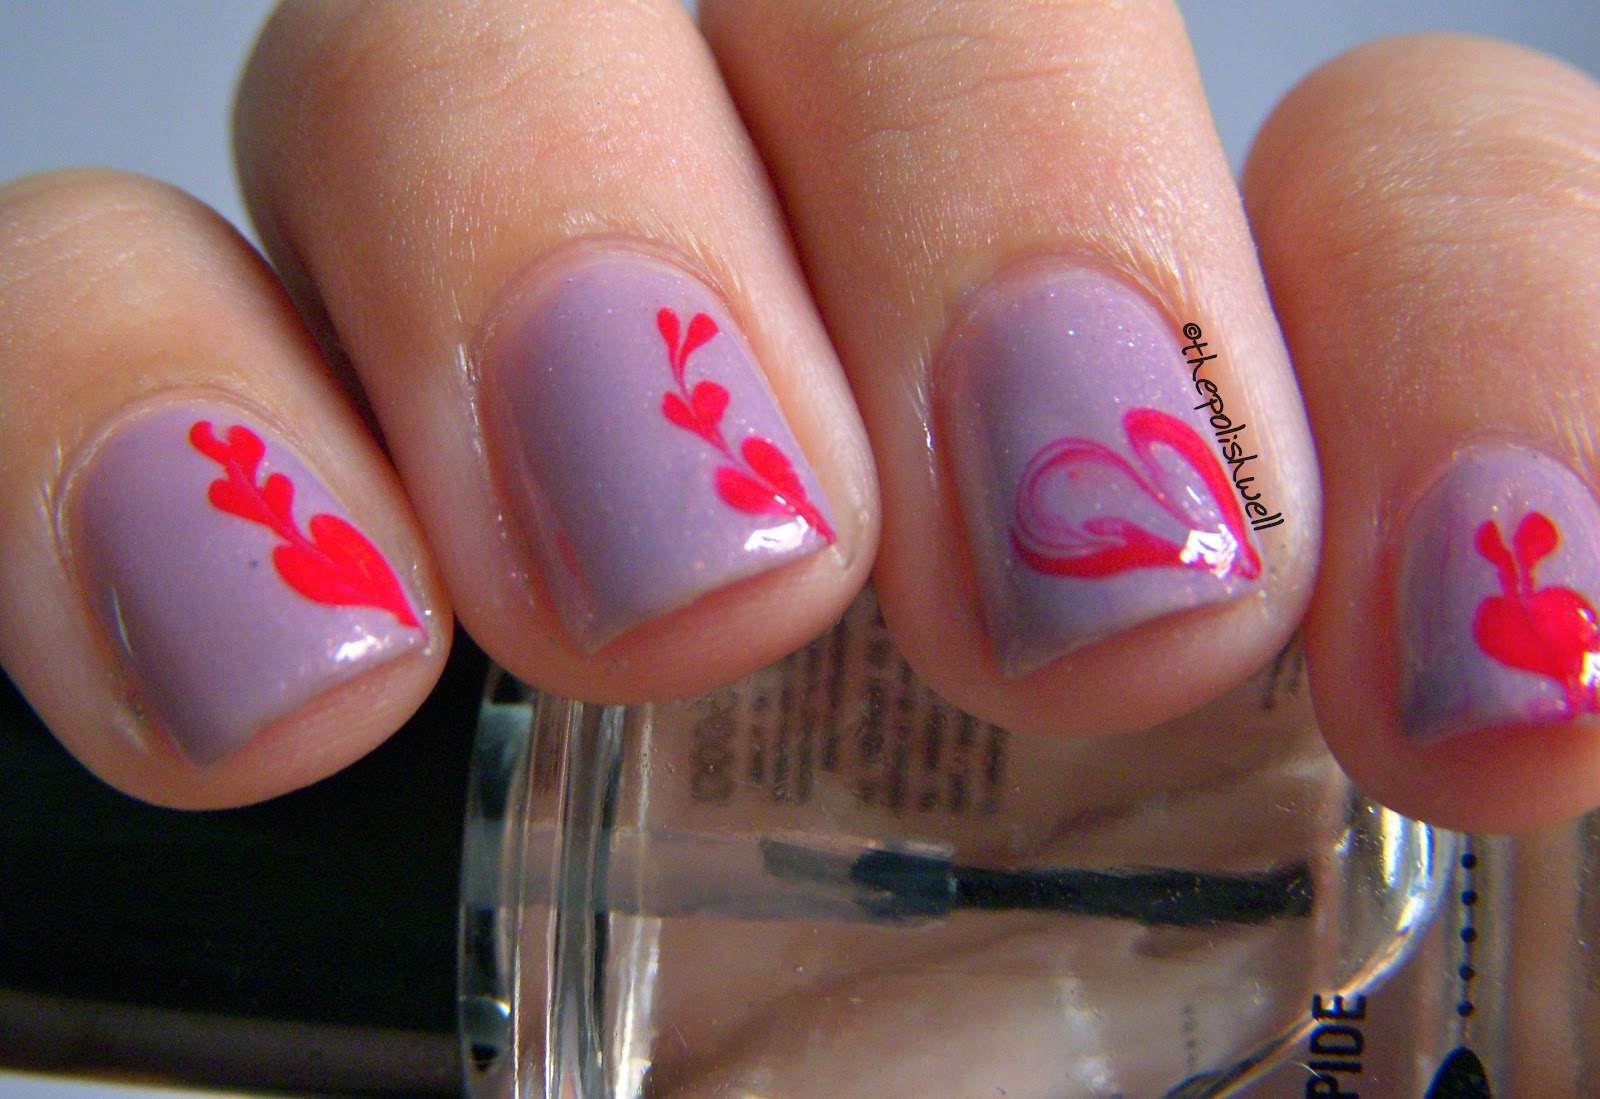 3. Cute and Simple Heart Nail Designs - wide 7